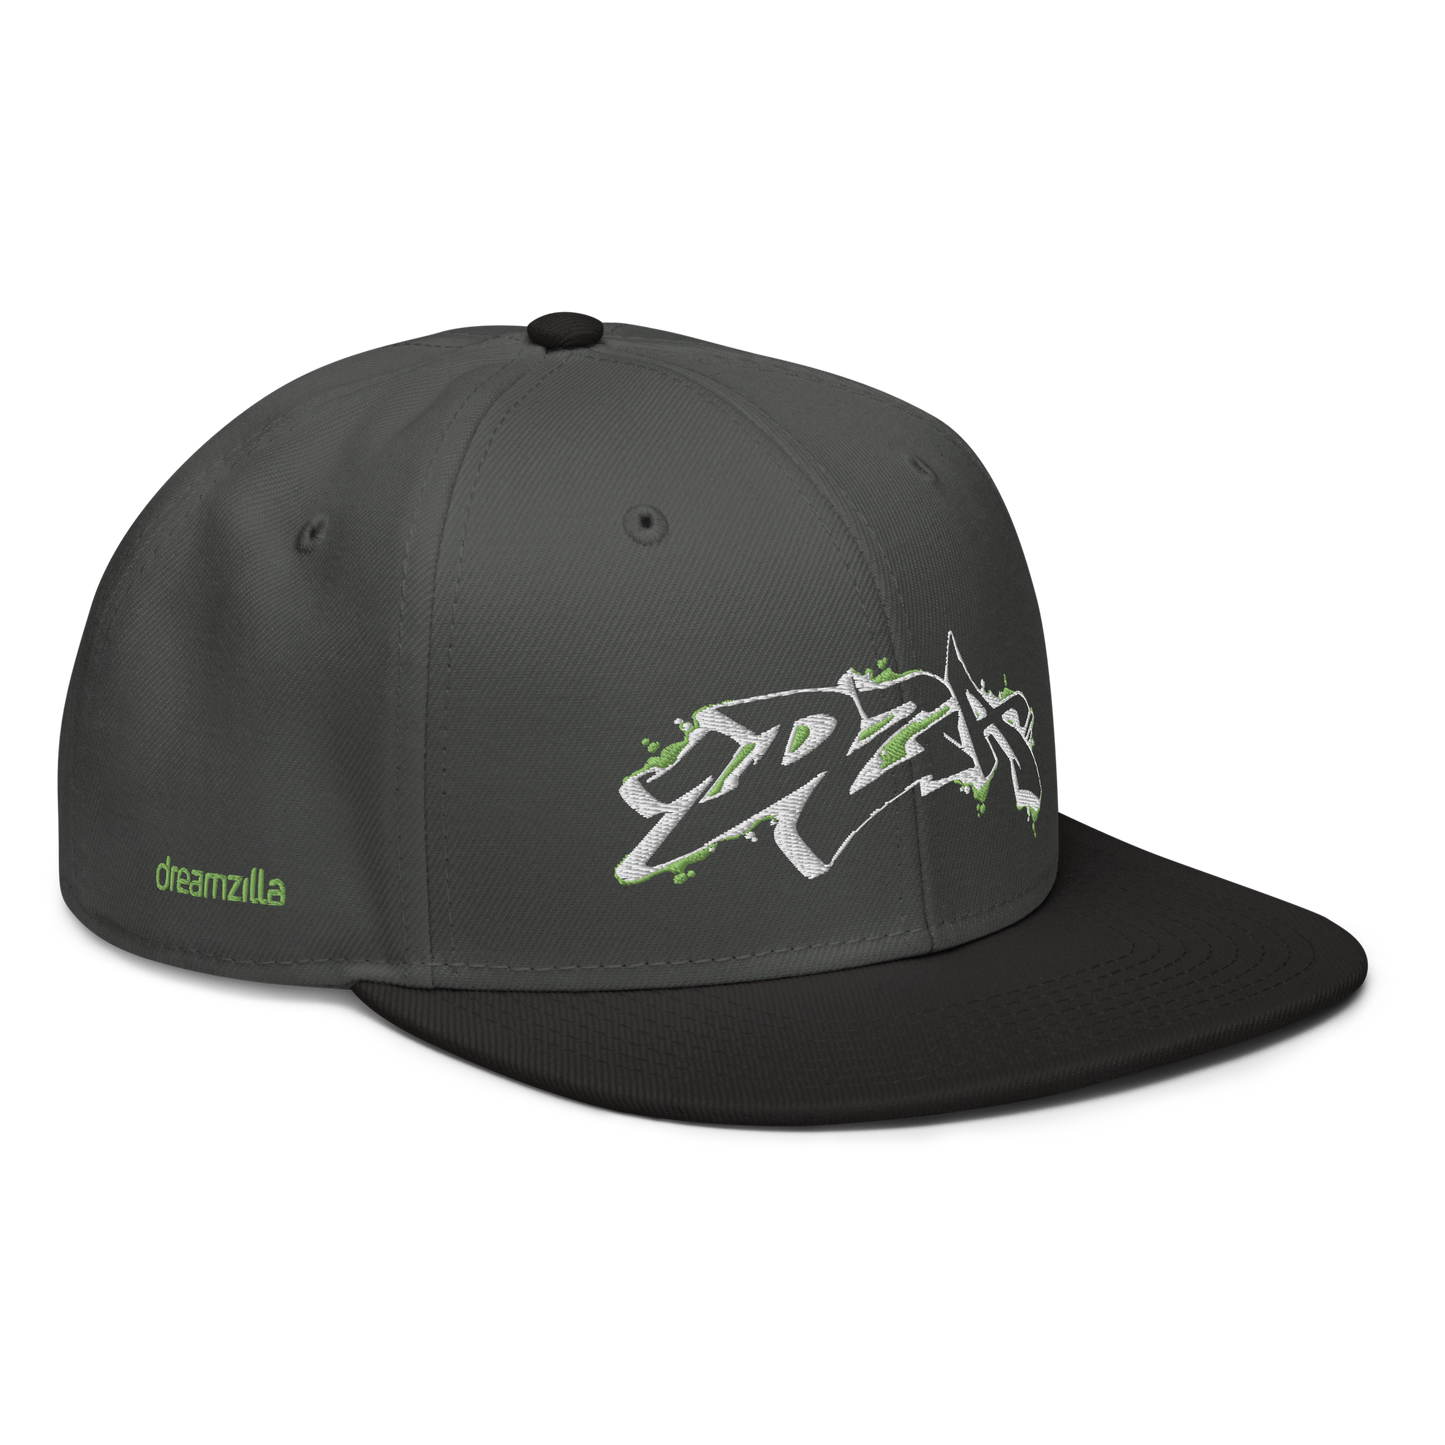 Angled view of Graffiti DZA Snapback by Sanitor in Charcoal Gray with Black Brim